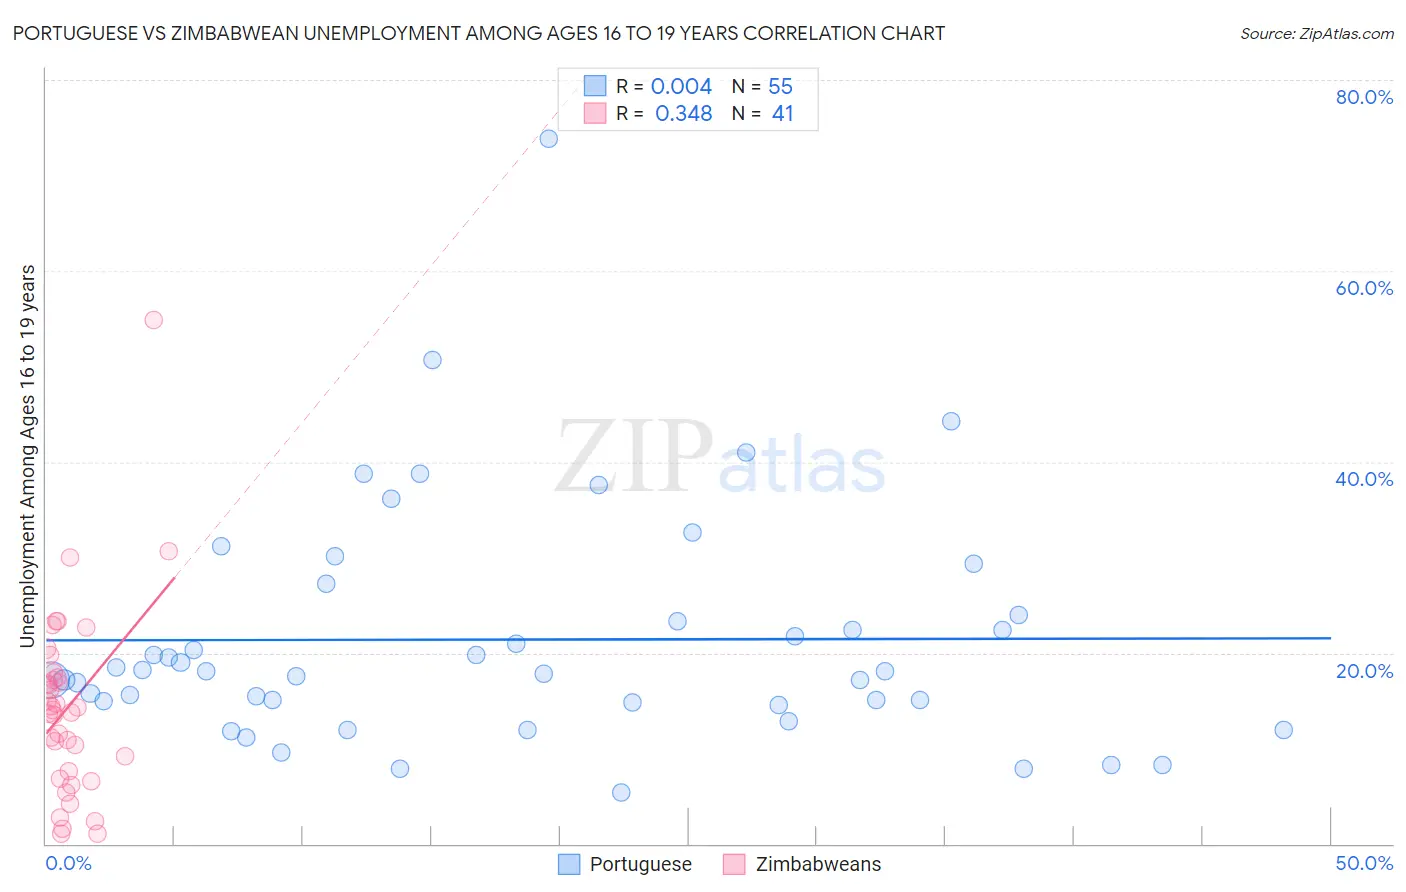 Portuguese vs Zimbabwean Unemployment Among Ages 16 to 19 years